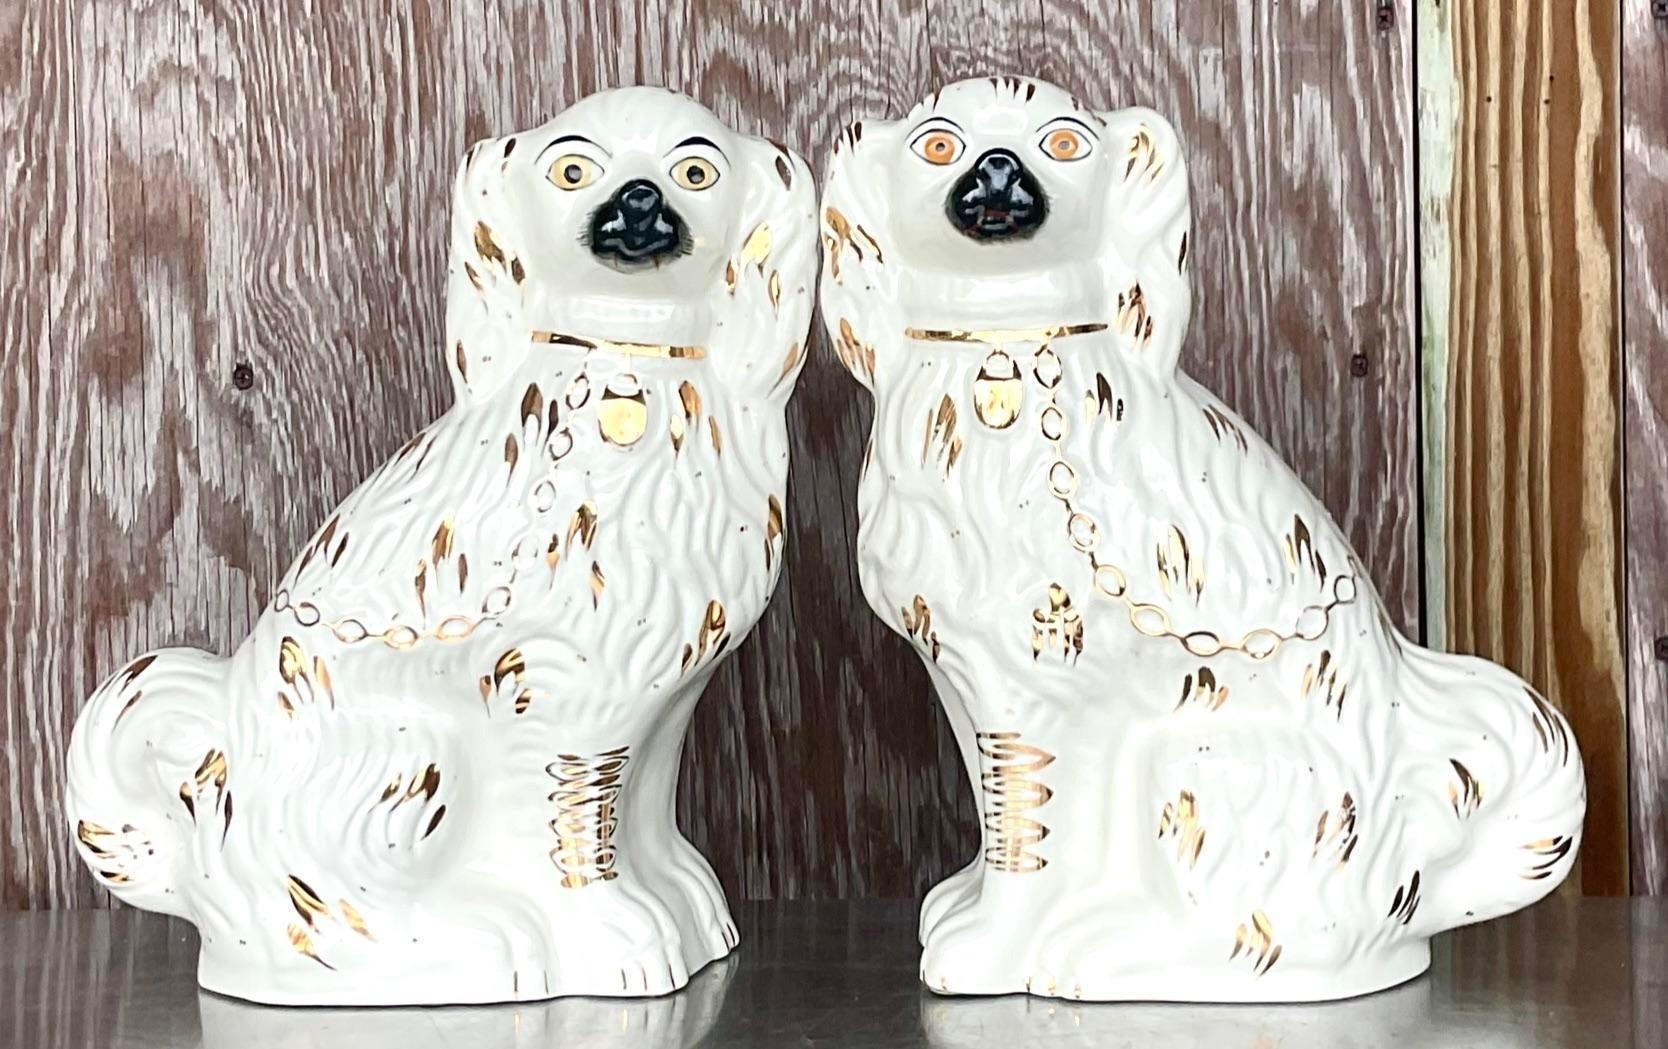 A fabulous pair of glazed ceramic dogs. Made by the Staffordshire group in Kent, England. Beautiful hand painted detail and signed on the bottom. Acquired from a Palm Beach estate.